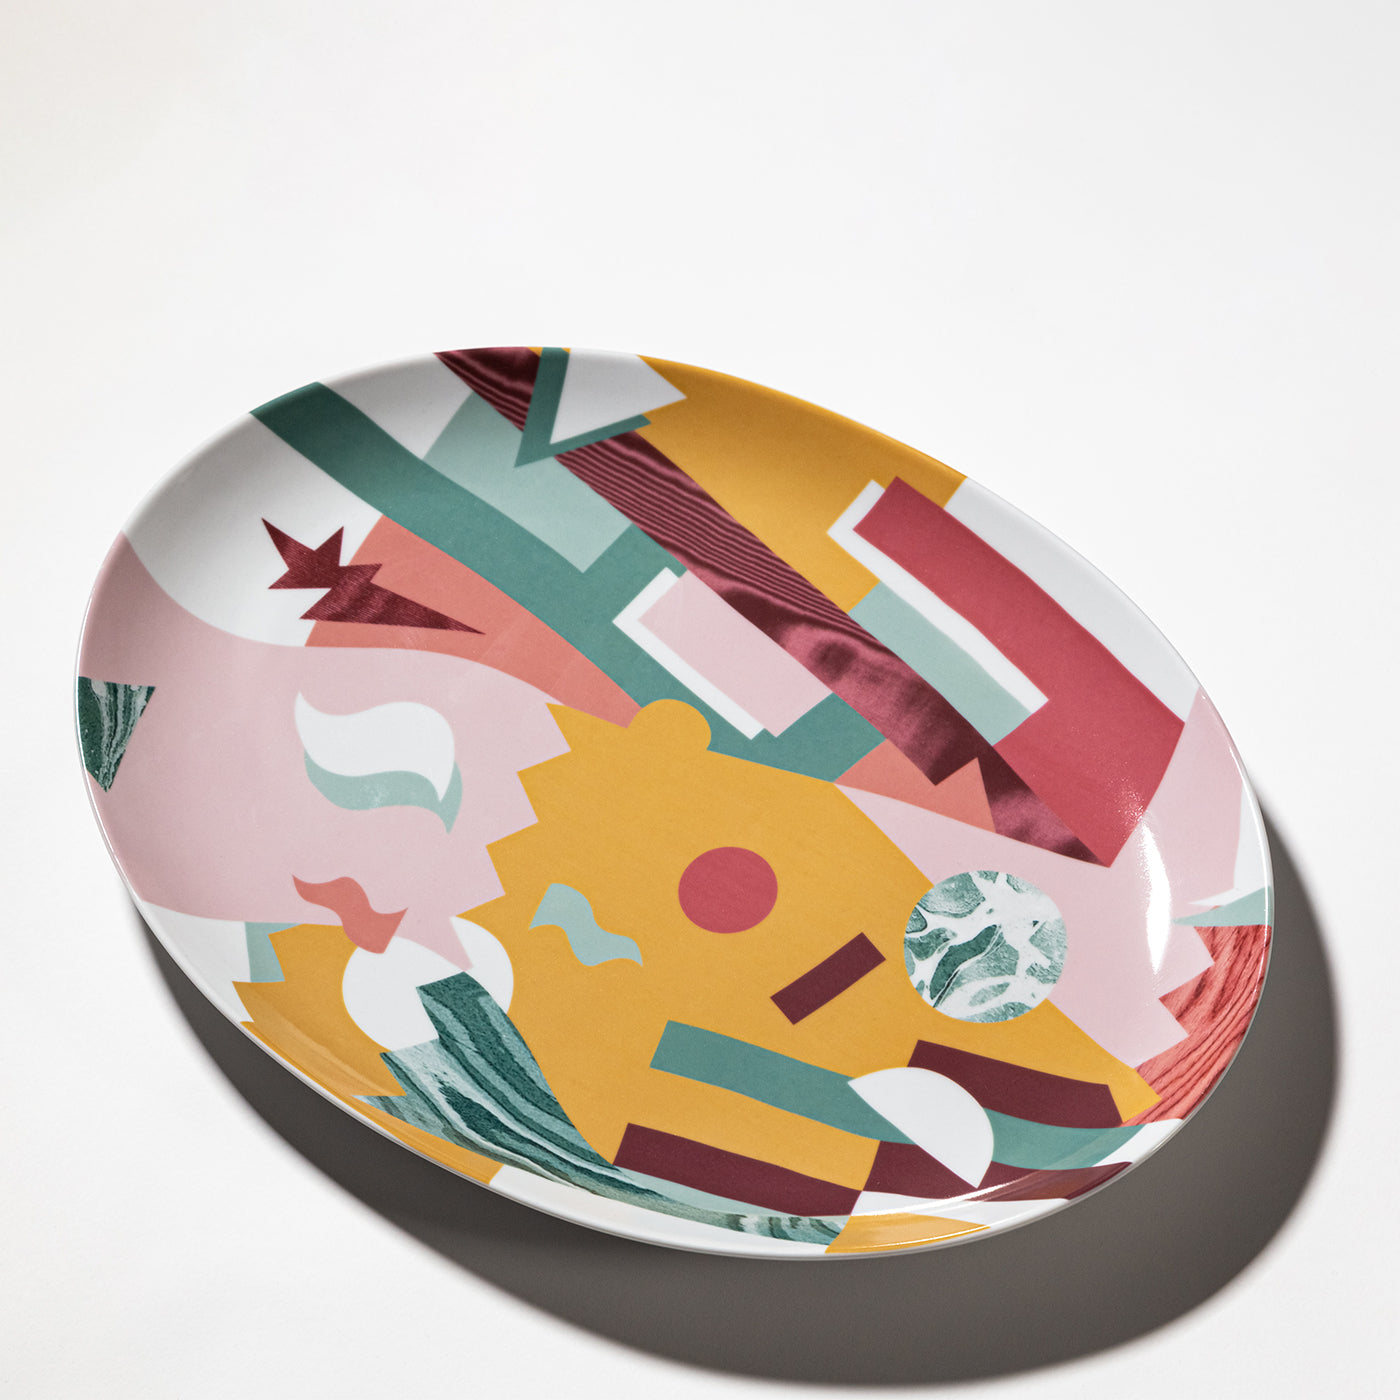 Alchimie Oval Porcelain Plate with Abstract Decor - Alternative view 1